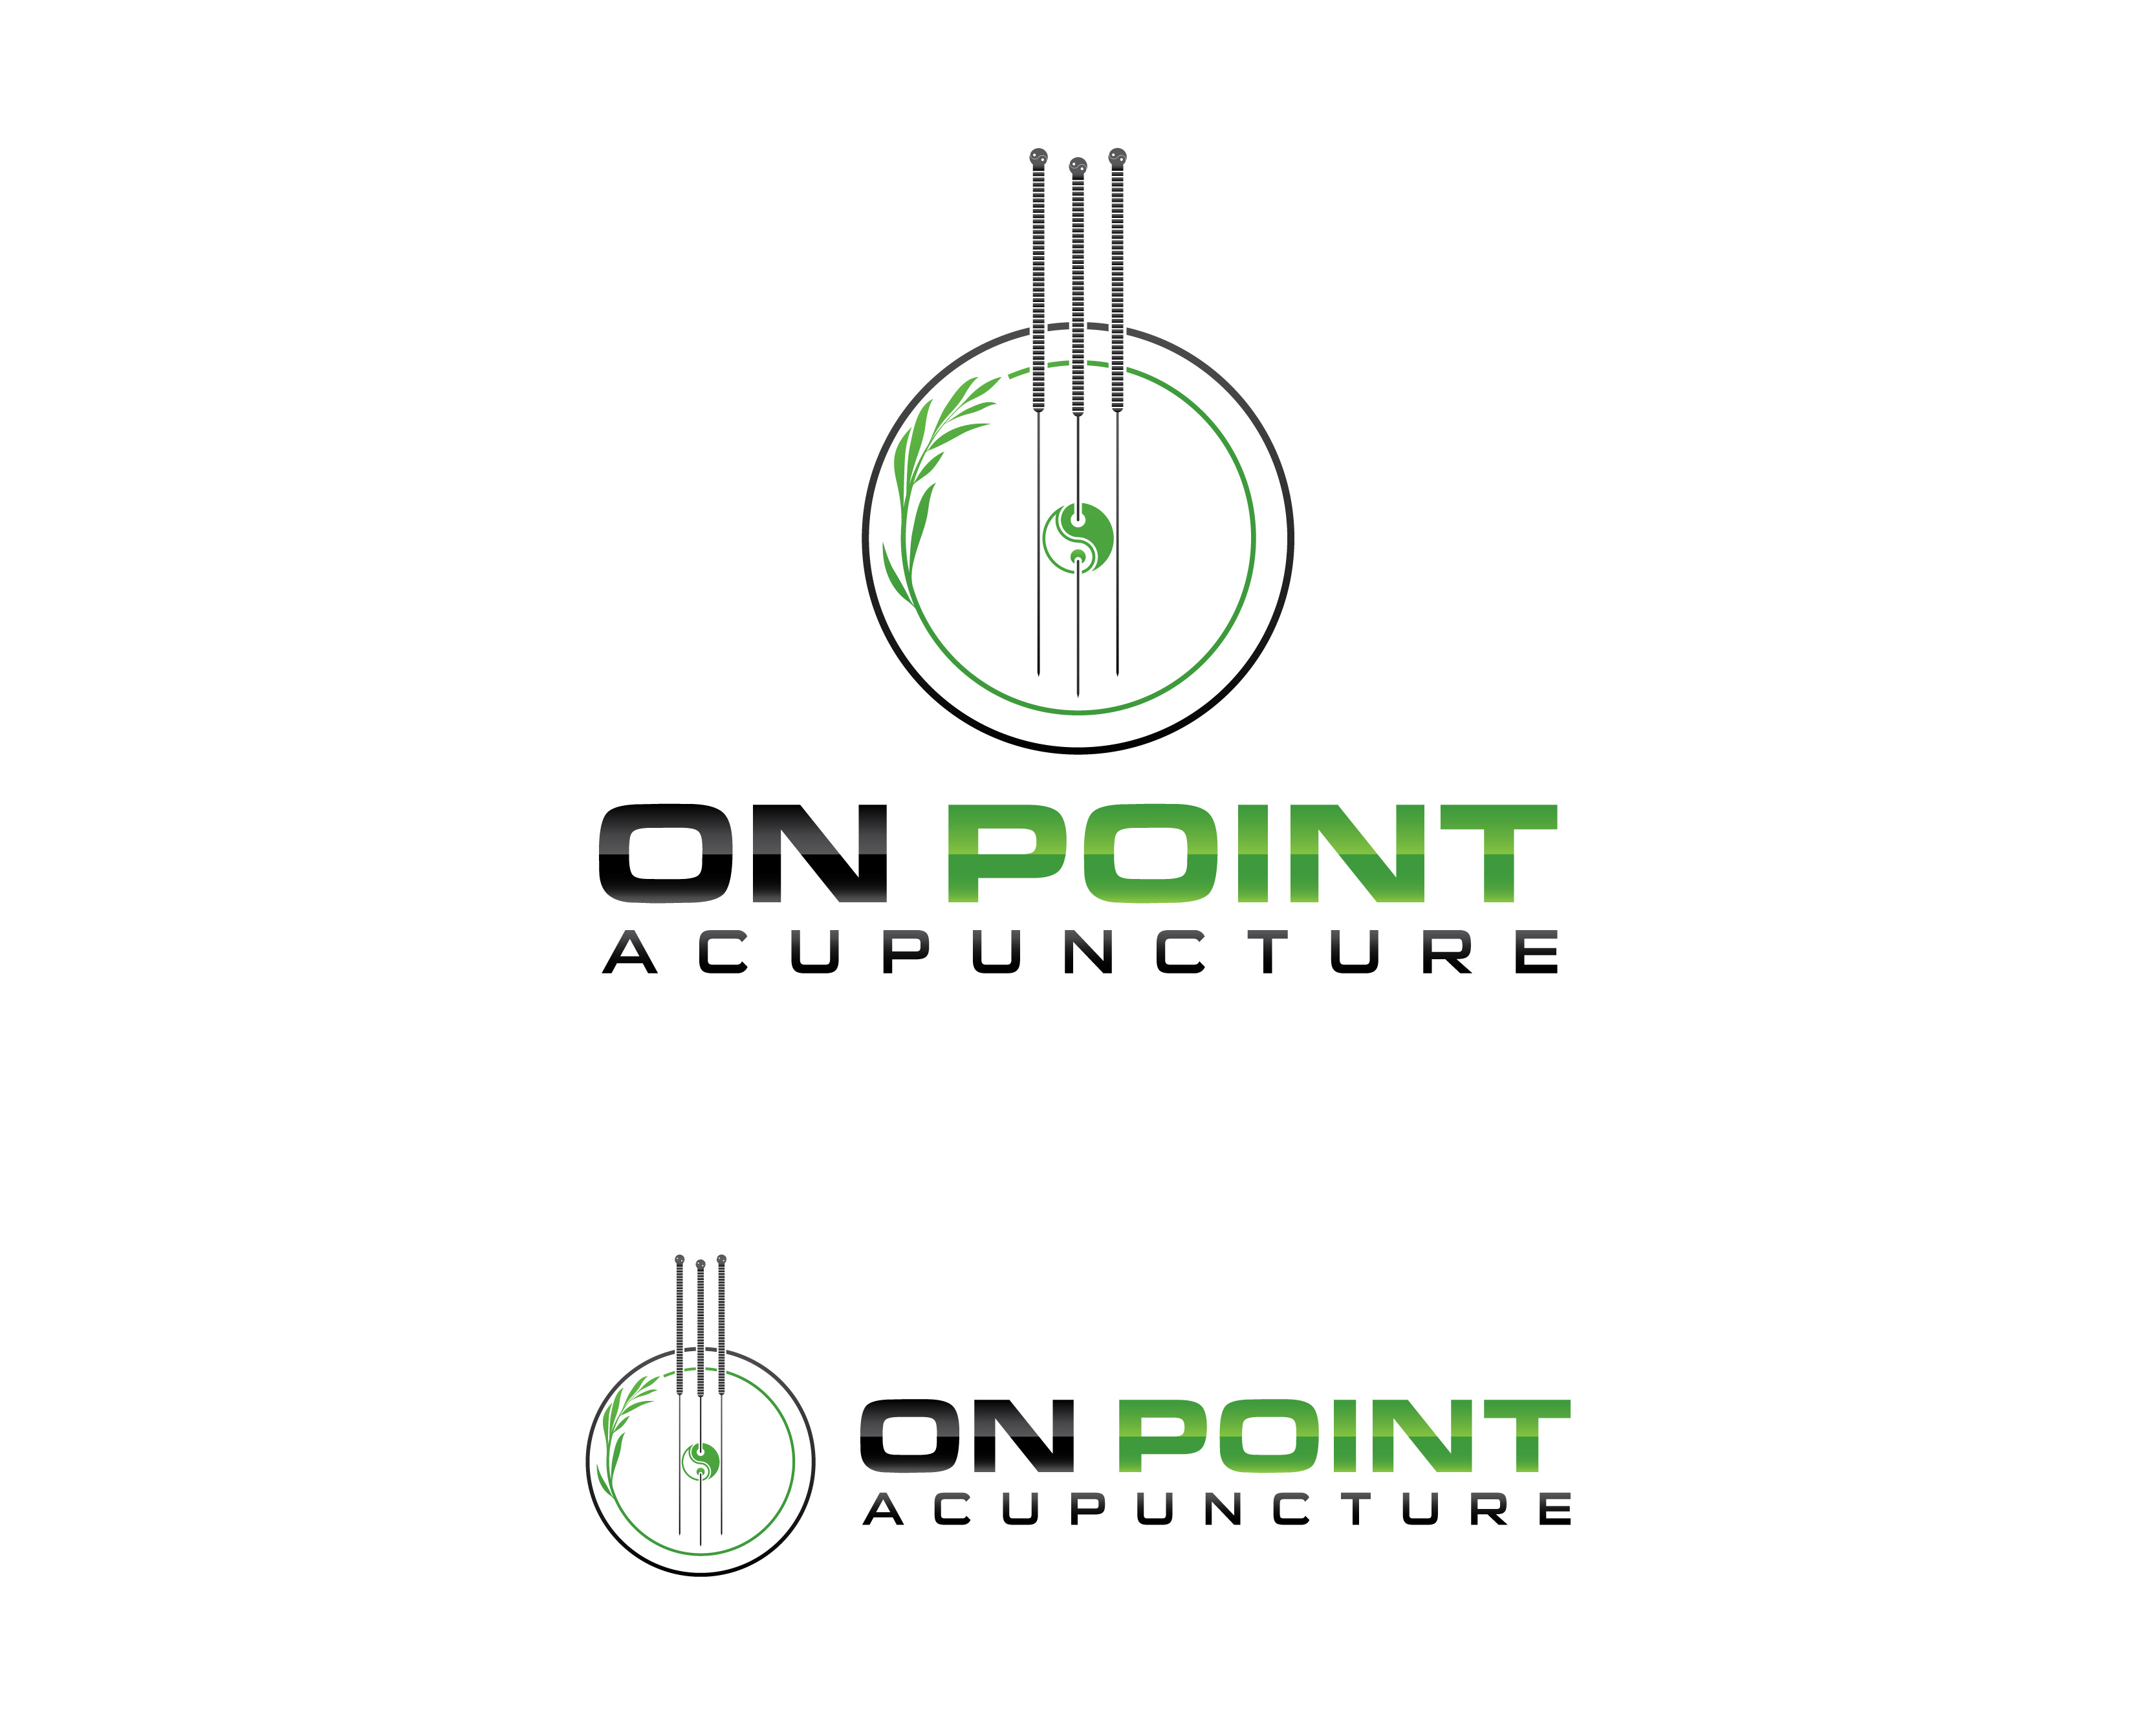 Simple Cures Logo Acupuncture - Acupuncture Logo Free Download, HD Png  Download - 1224x1224(#6194182) - PngFind